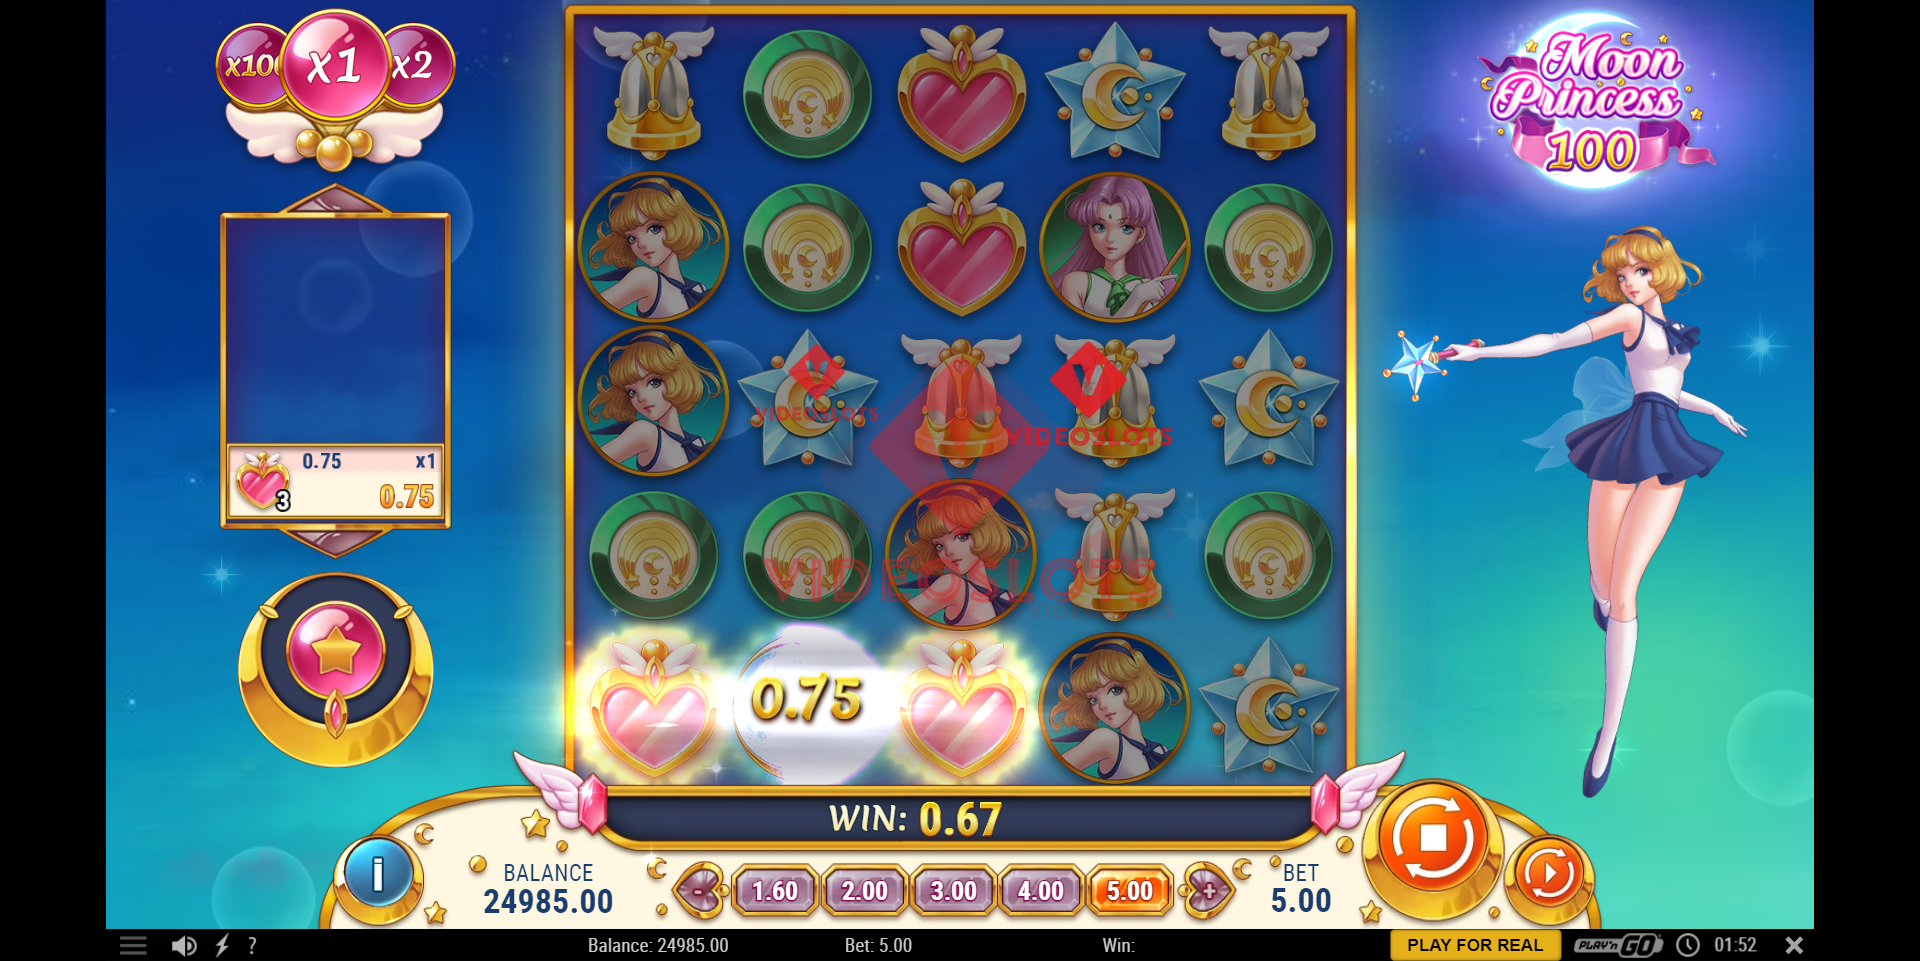 Base Game for Moon Princess 100 slot from Play'n Go